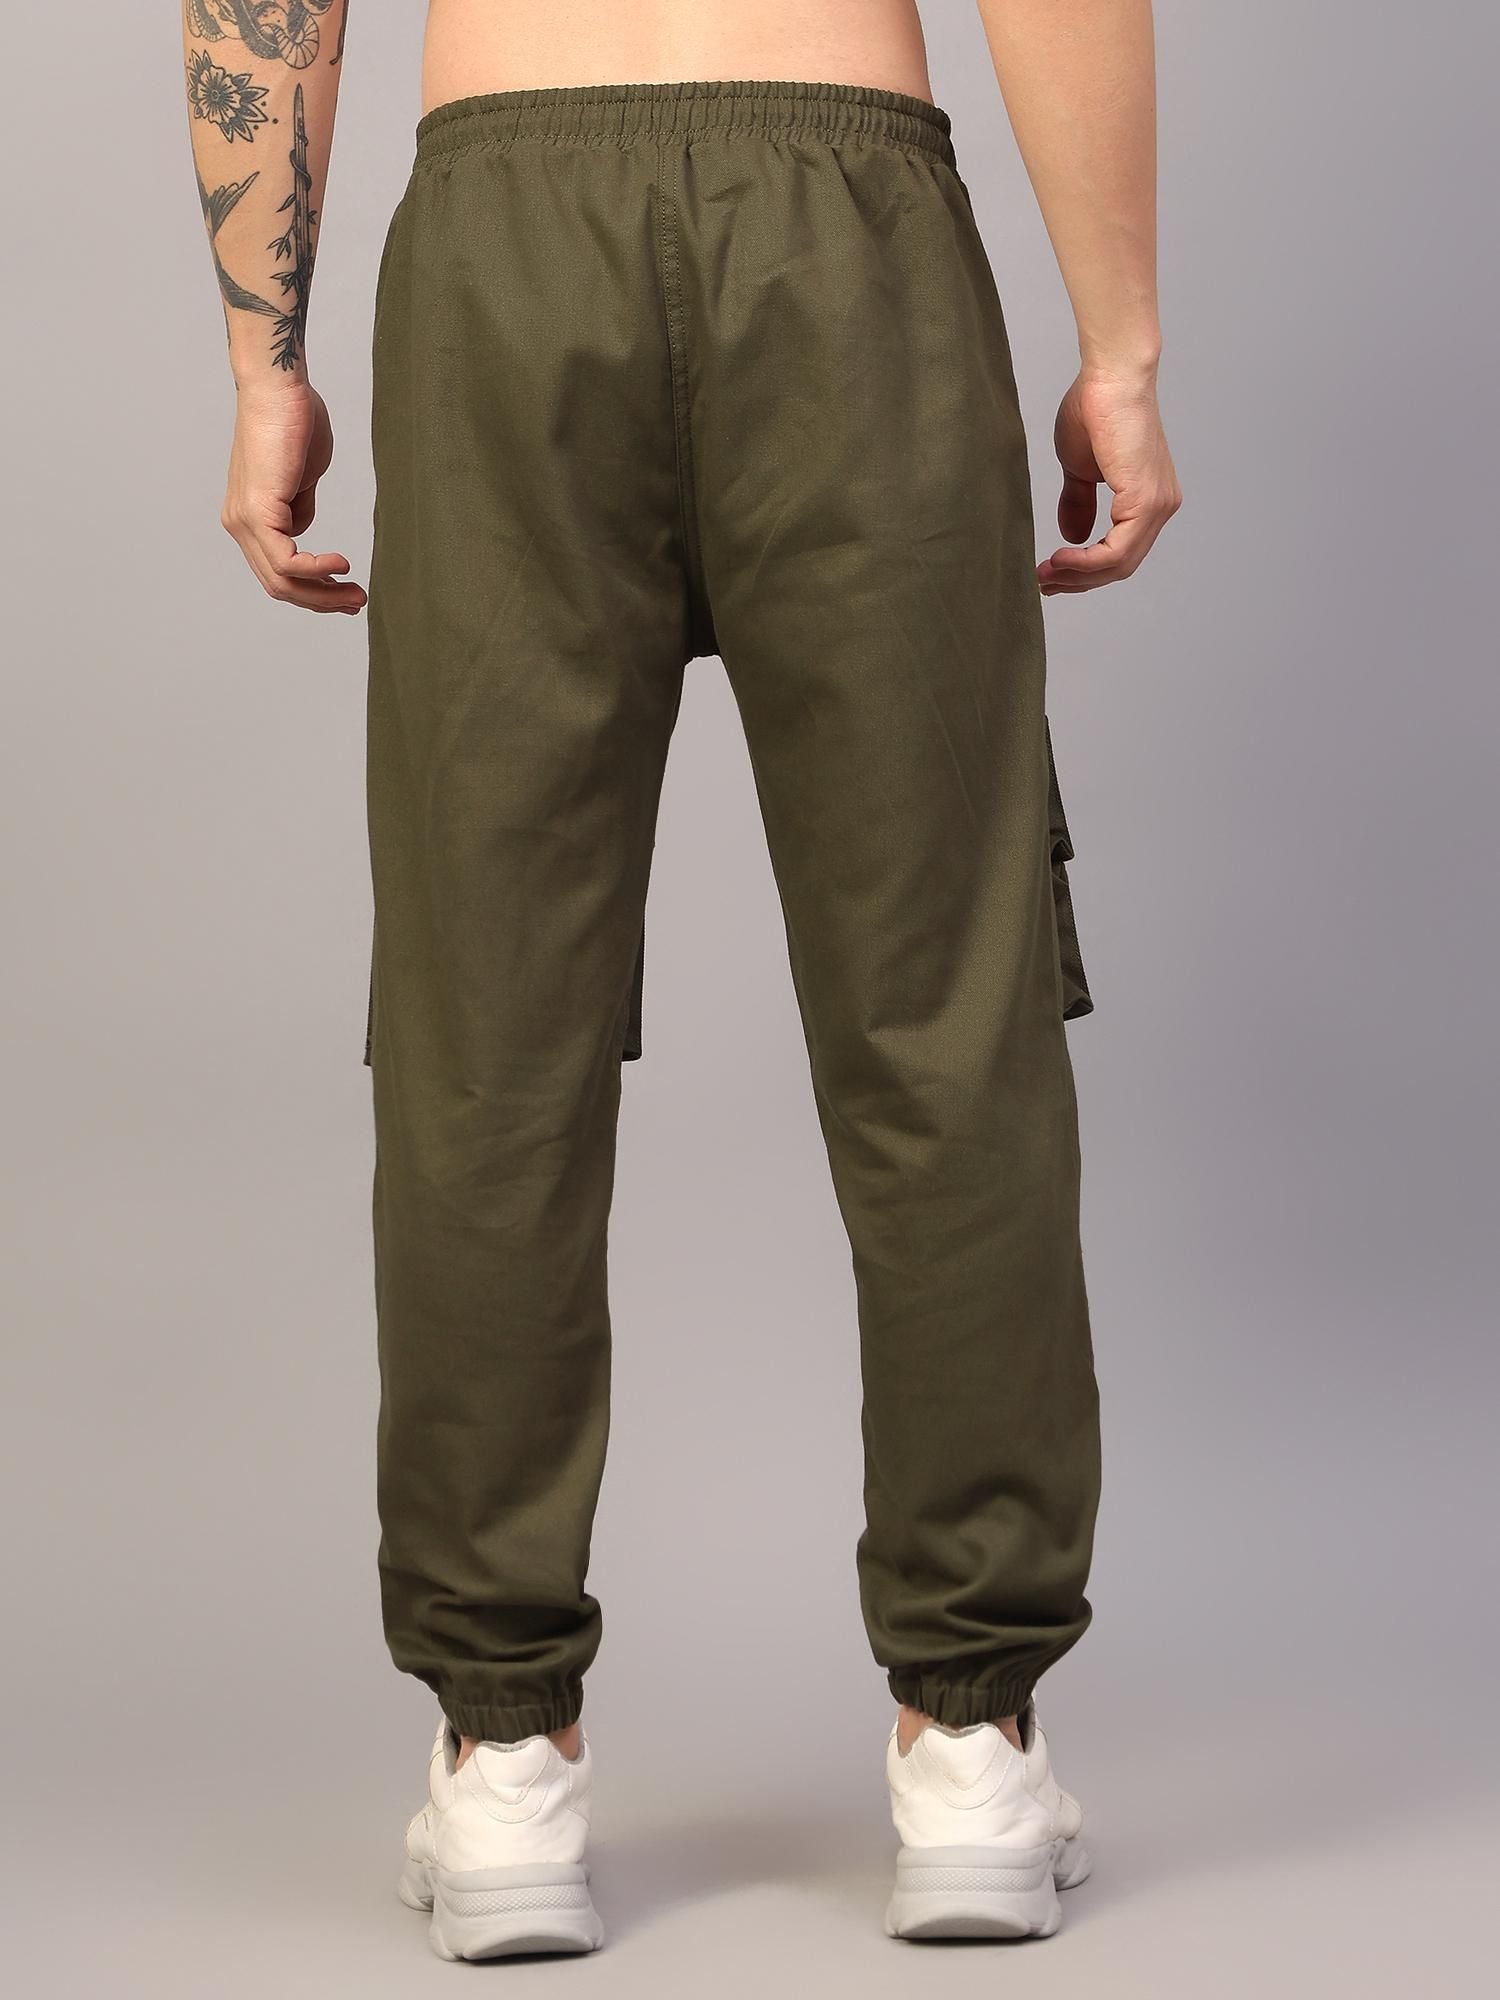 Men's Slim Fit Cargo Pants in Olive Green Cotton Fabric with Multiple Pockets for Utility